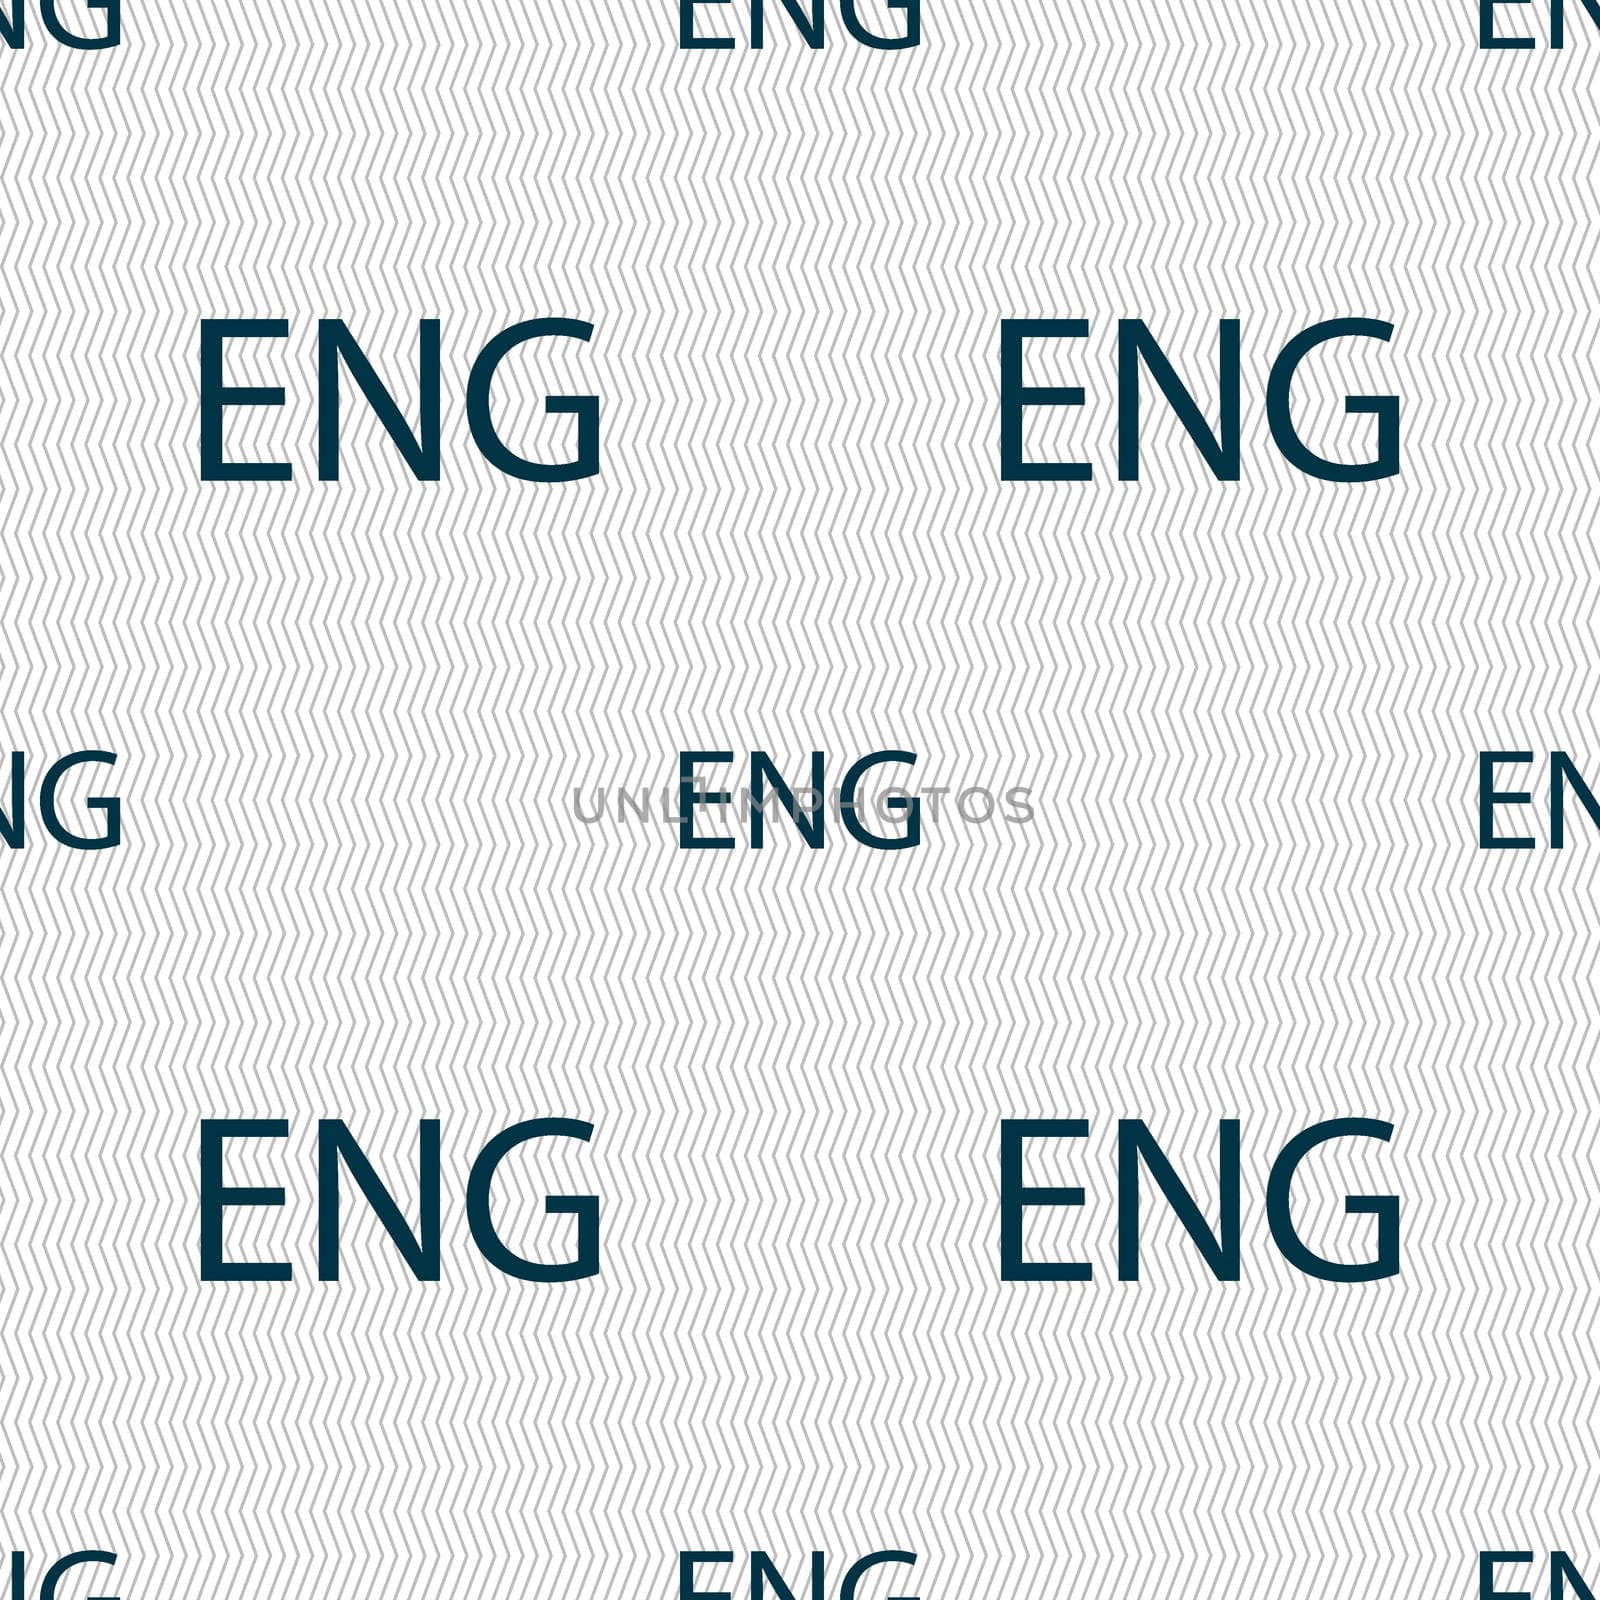 English sign icon. Great Britain symbol. Seamless abstract background with geometric shapes. illustration